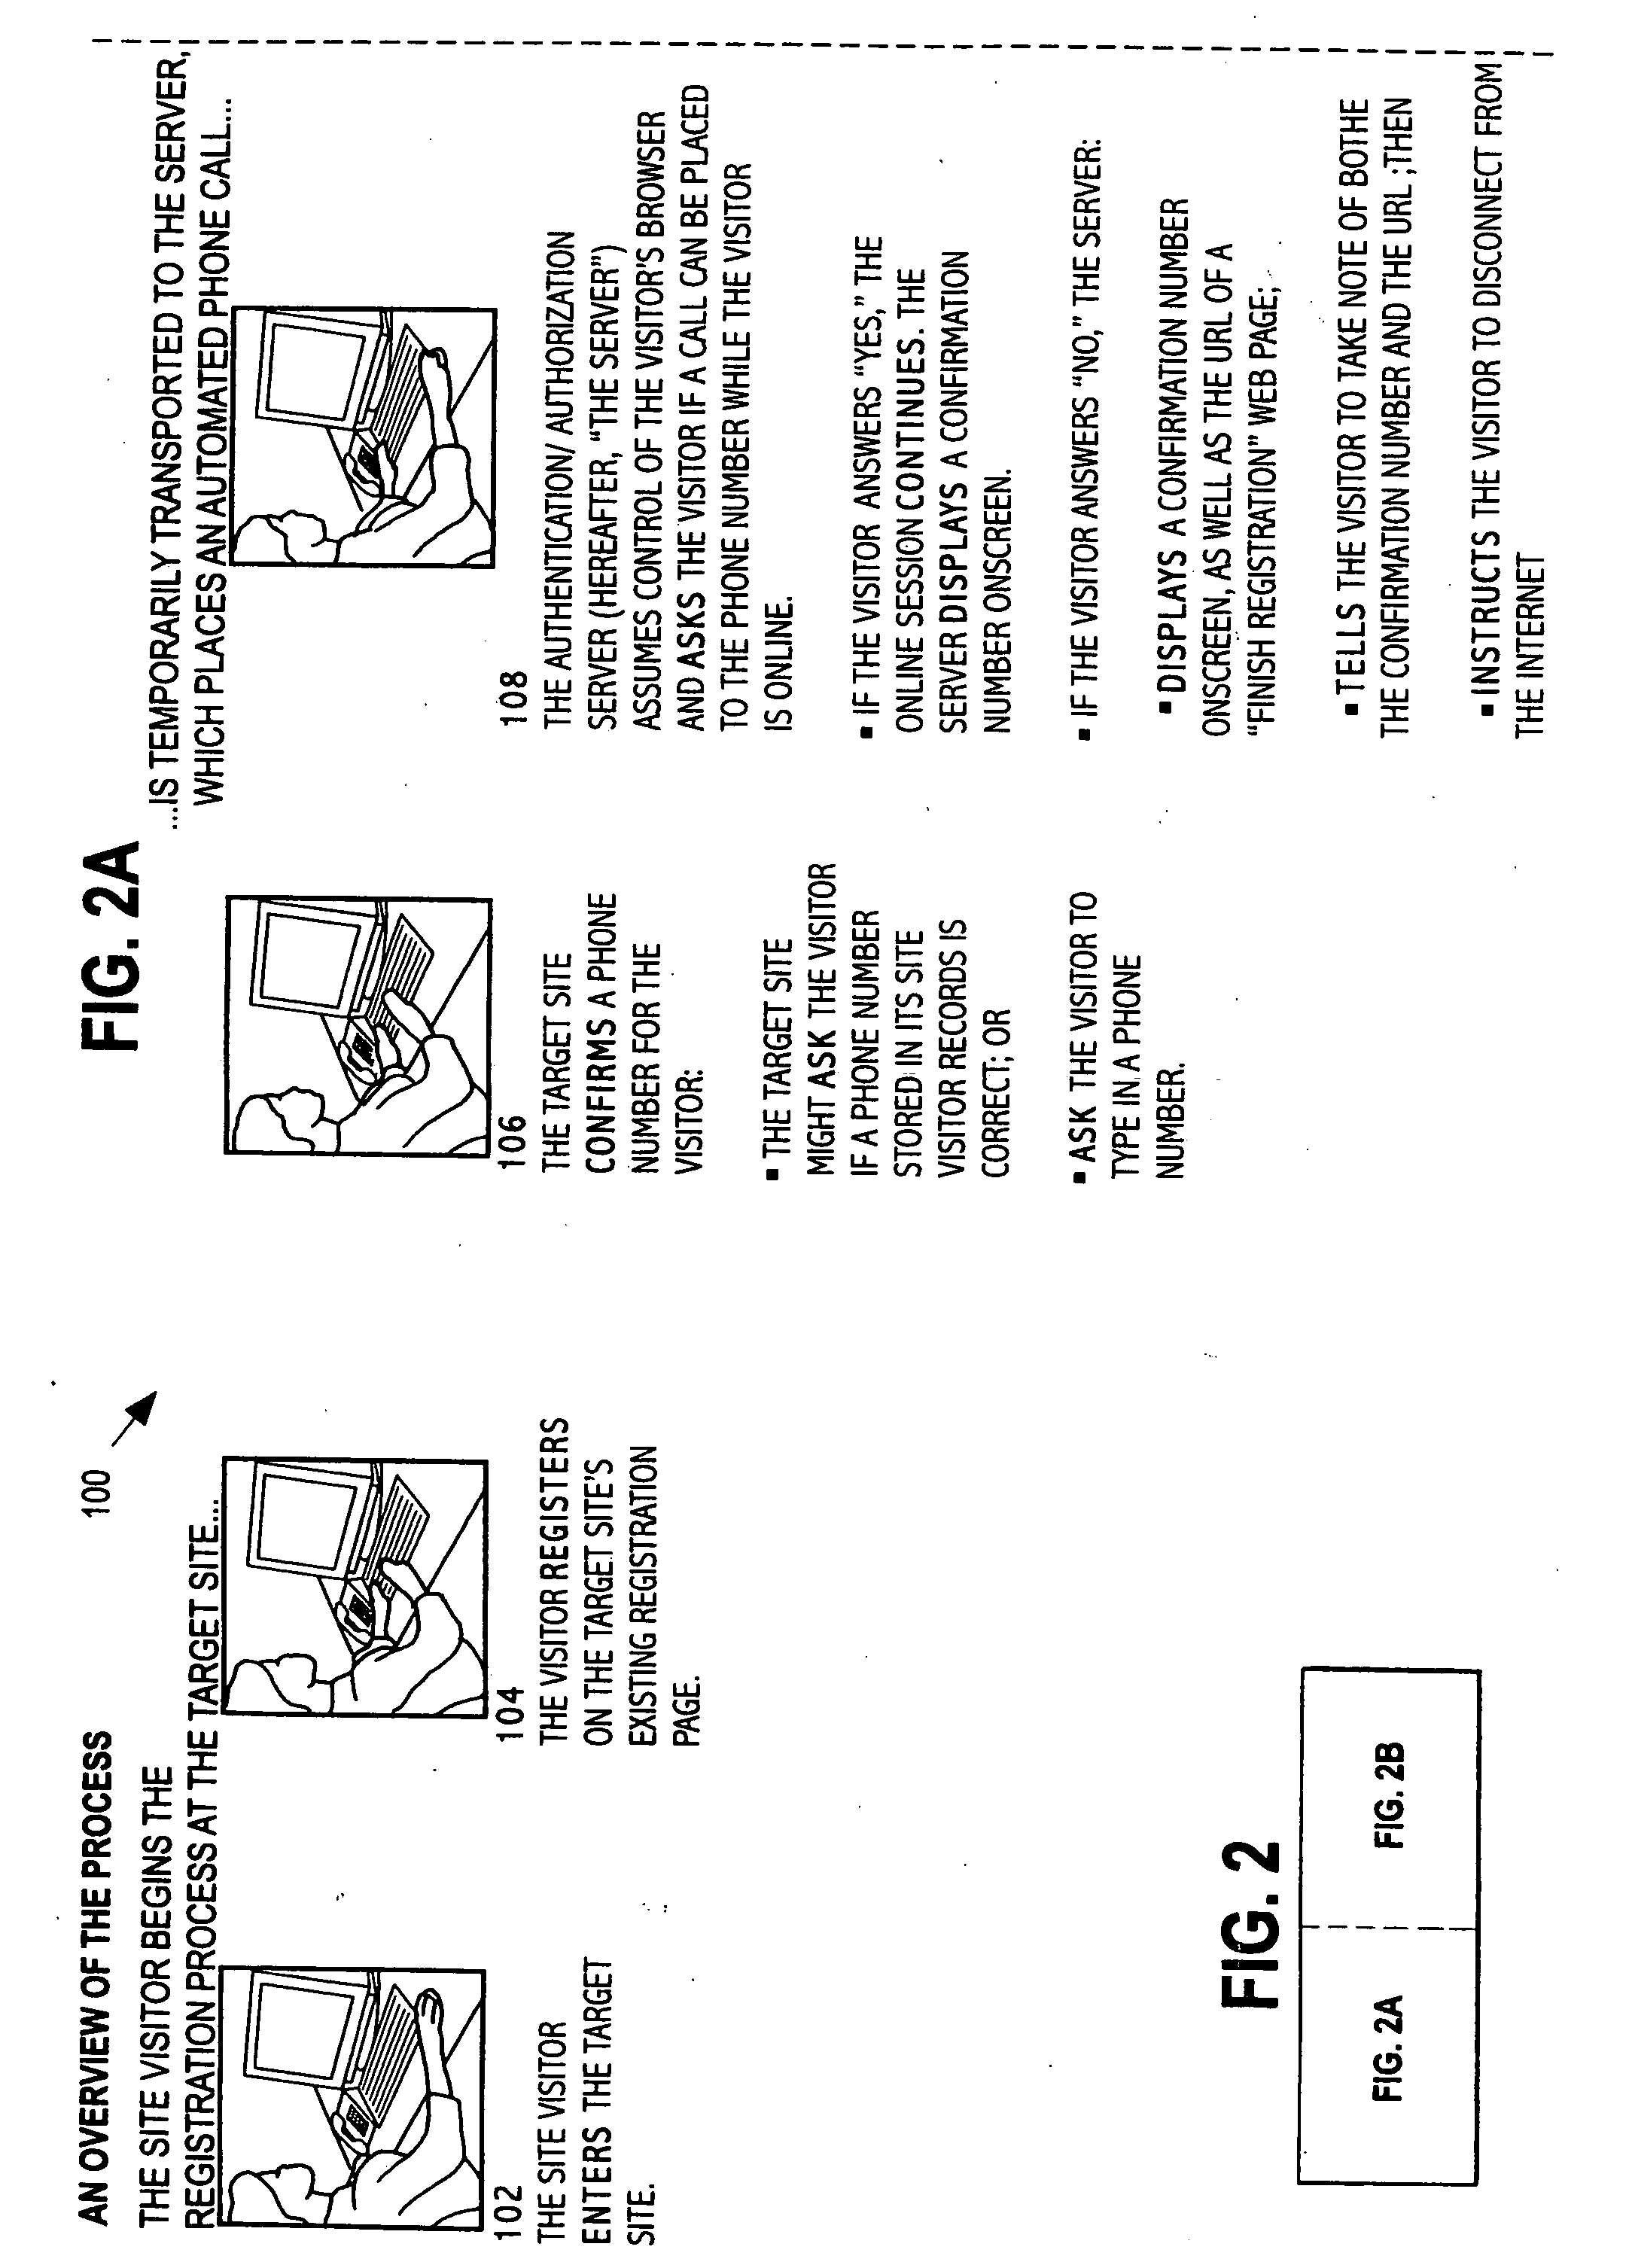 System and mehod of using the public switched telephone network in providing authentication or authorization for online transaction